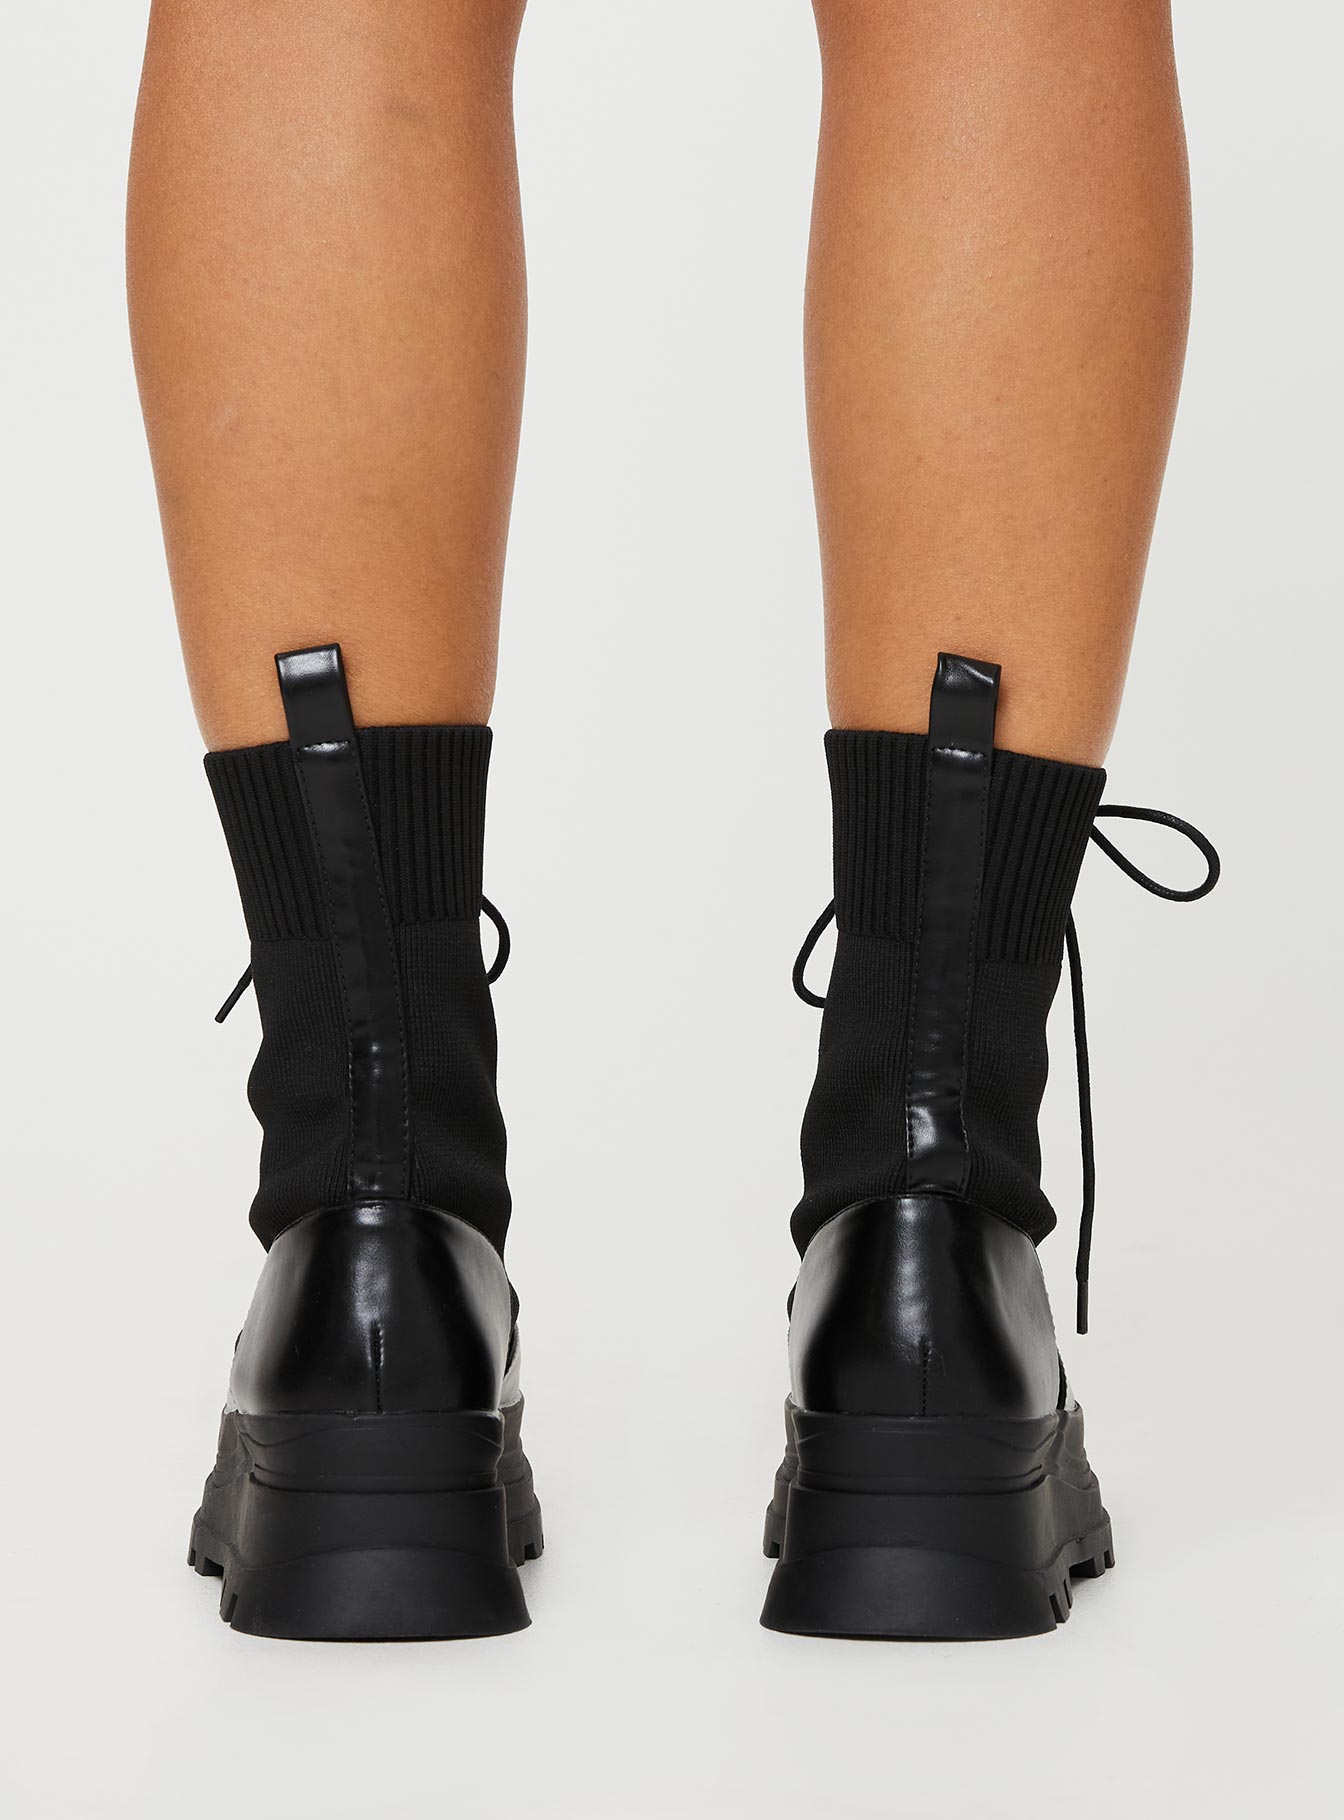 Muscle Boots Black